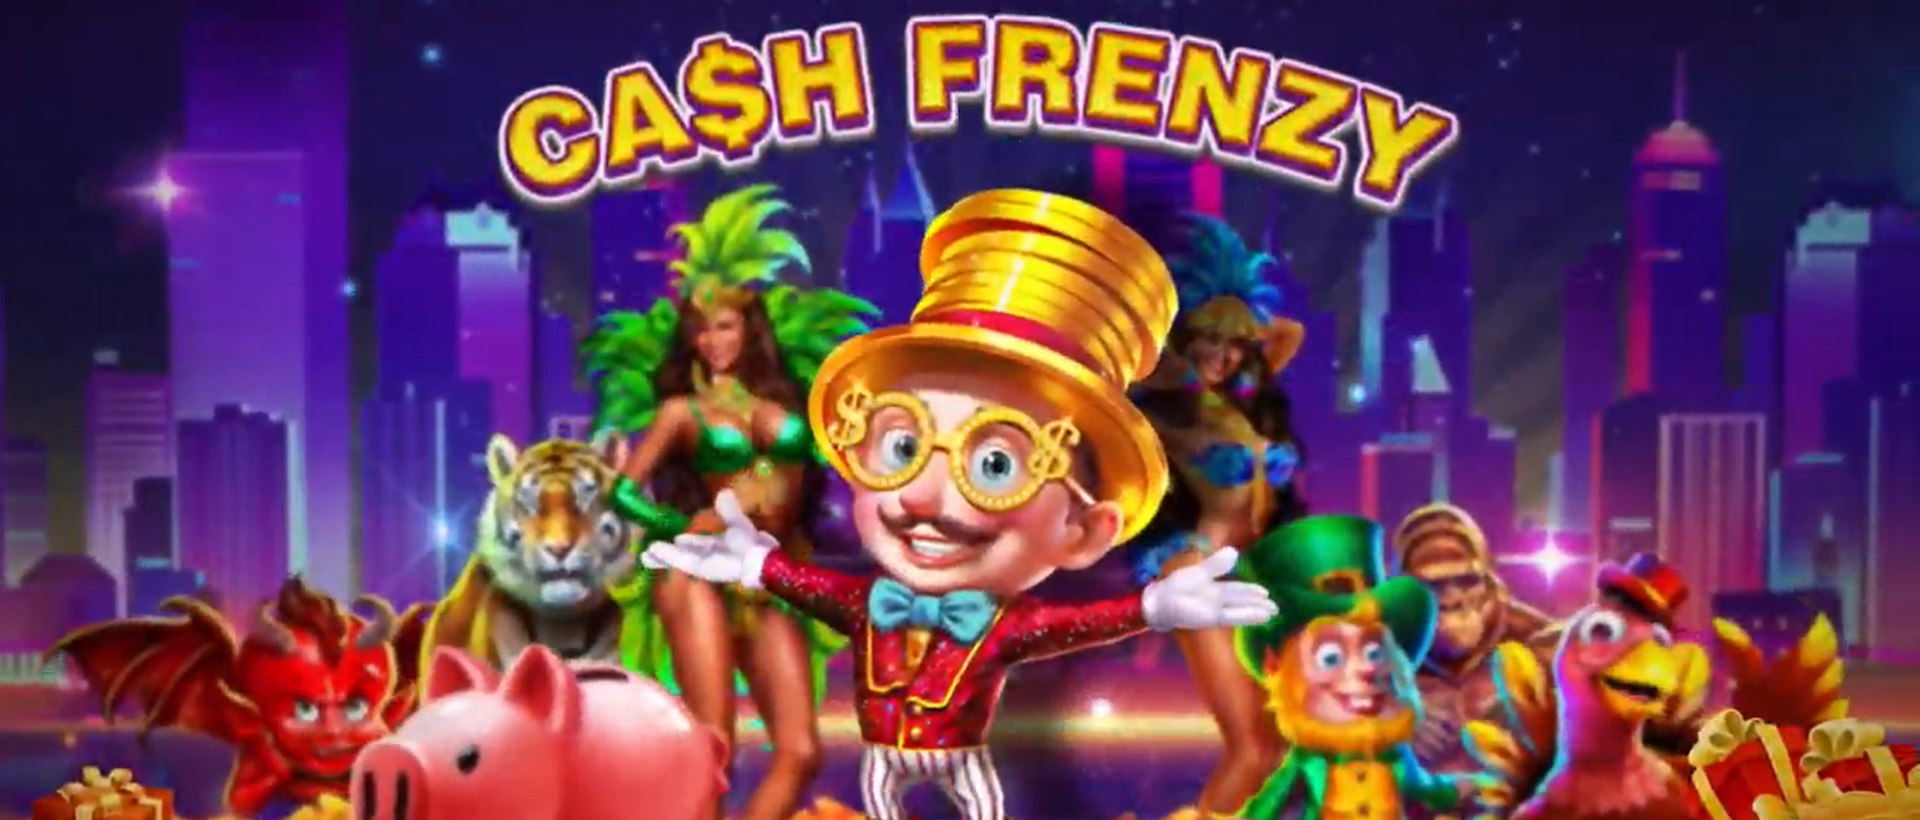 Download & Play Cash Frenzy™ - Casino Slots on PC & Mac with NoxPlayer (Emulator)